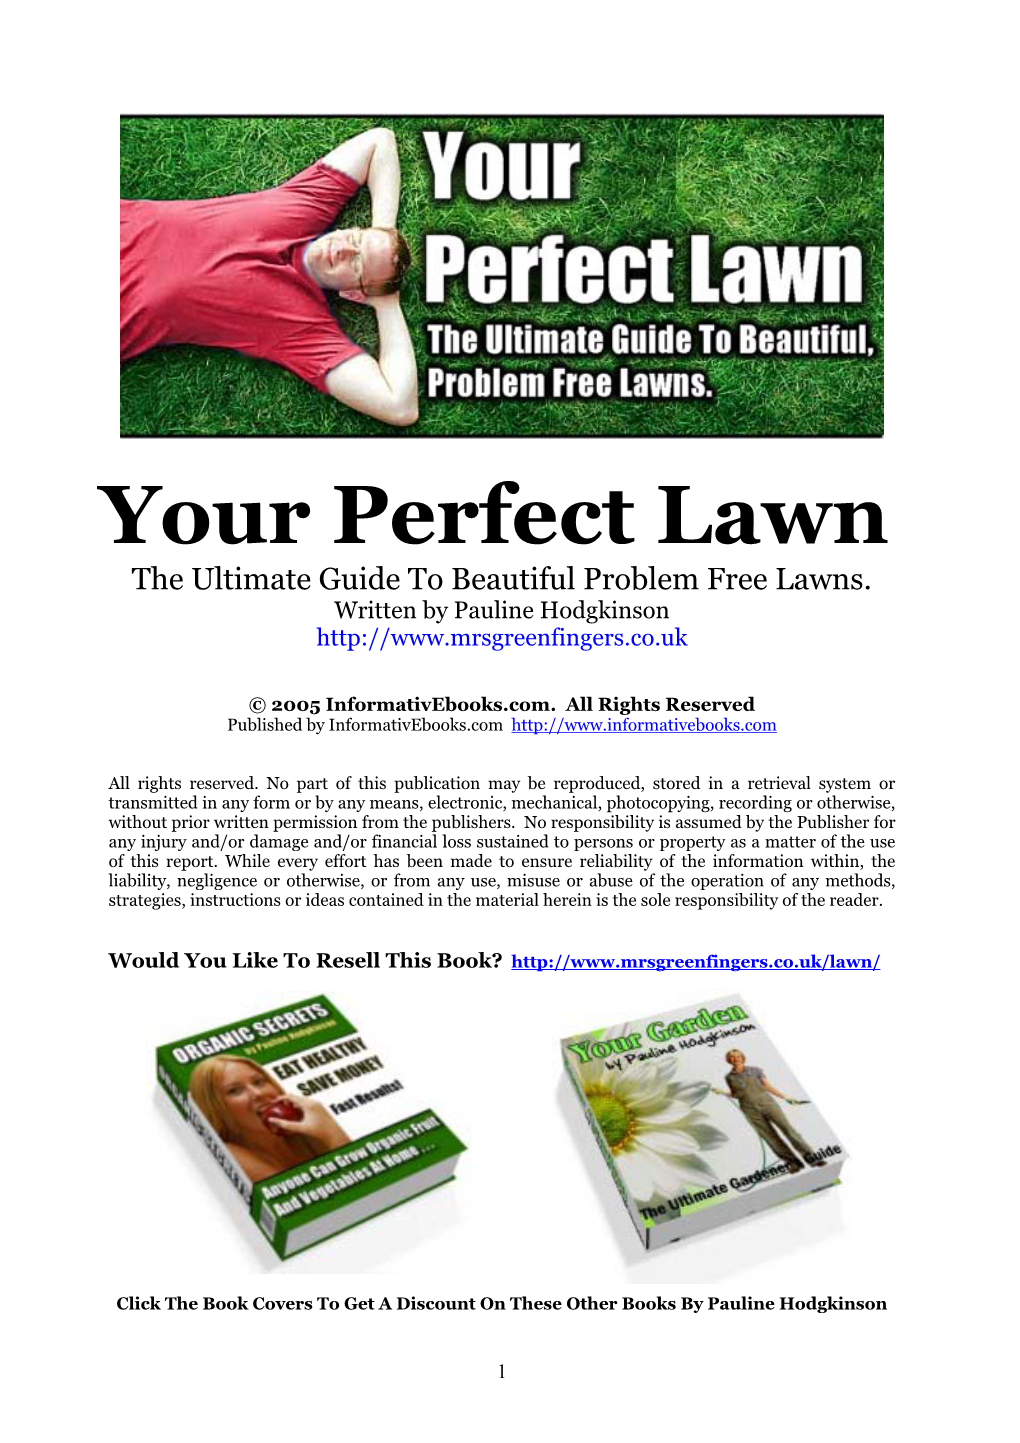 Your Perfect Lawn the Ultimate Guide to Beautiful Problem Free Lawns